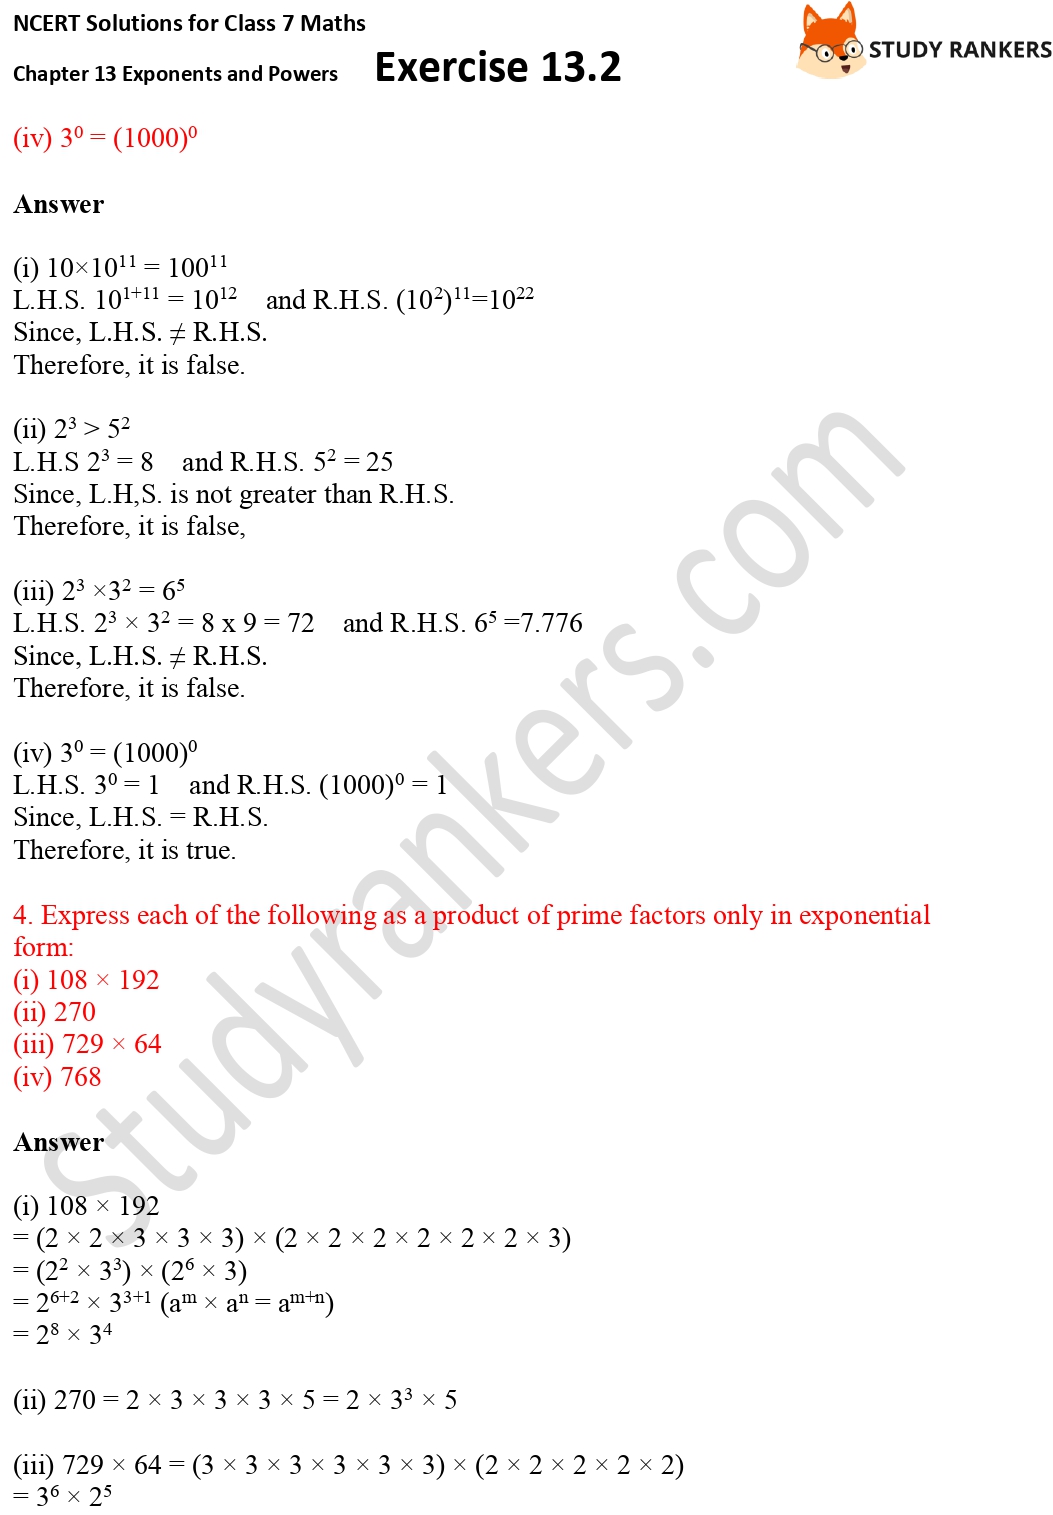 NCERT Solutions for Class 7 Maths Ch 13 Exponents and Powers Exercise 13.2 Part 3